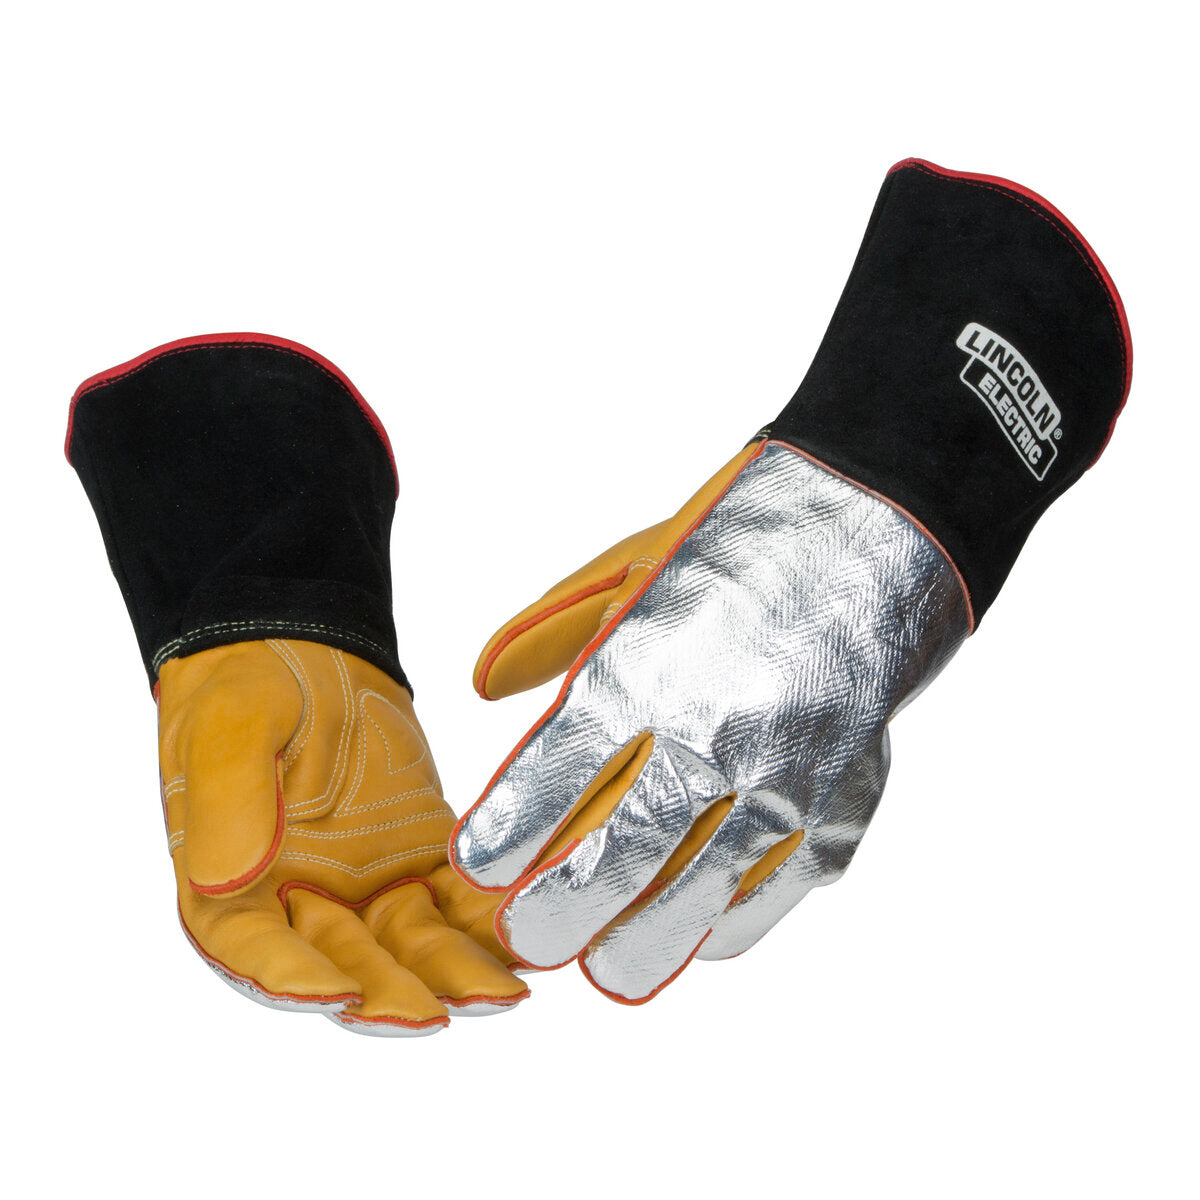 Lincoln Electric - Heat Resistant Welding Gloves - Large - K2982-L